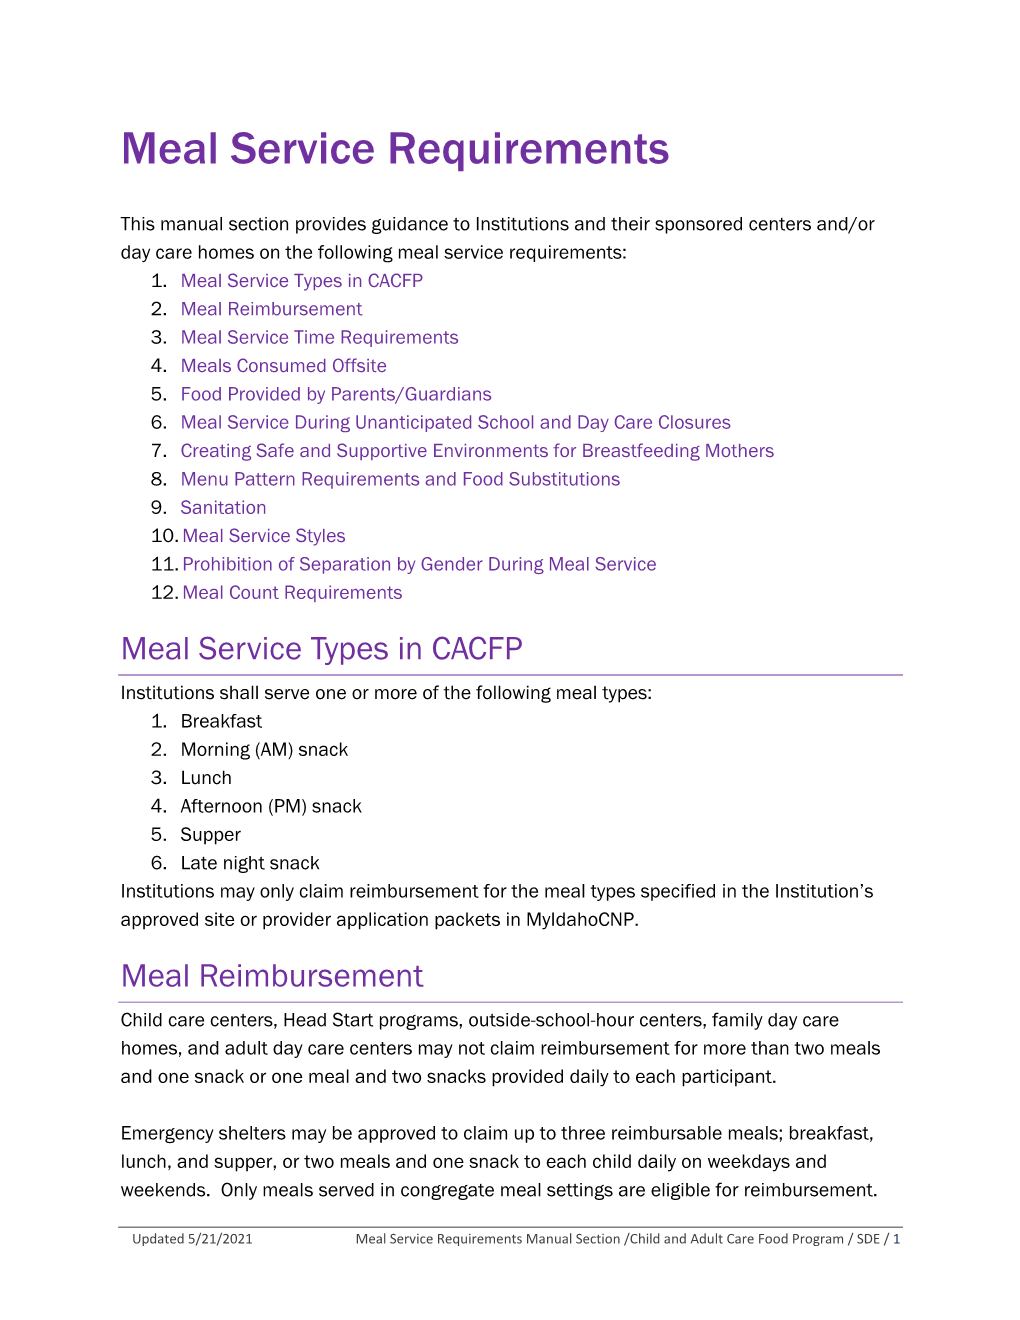 Meal Service Requirements Manual Section